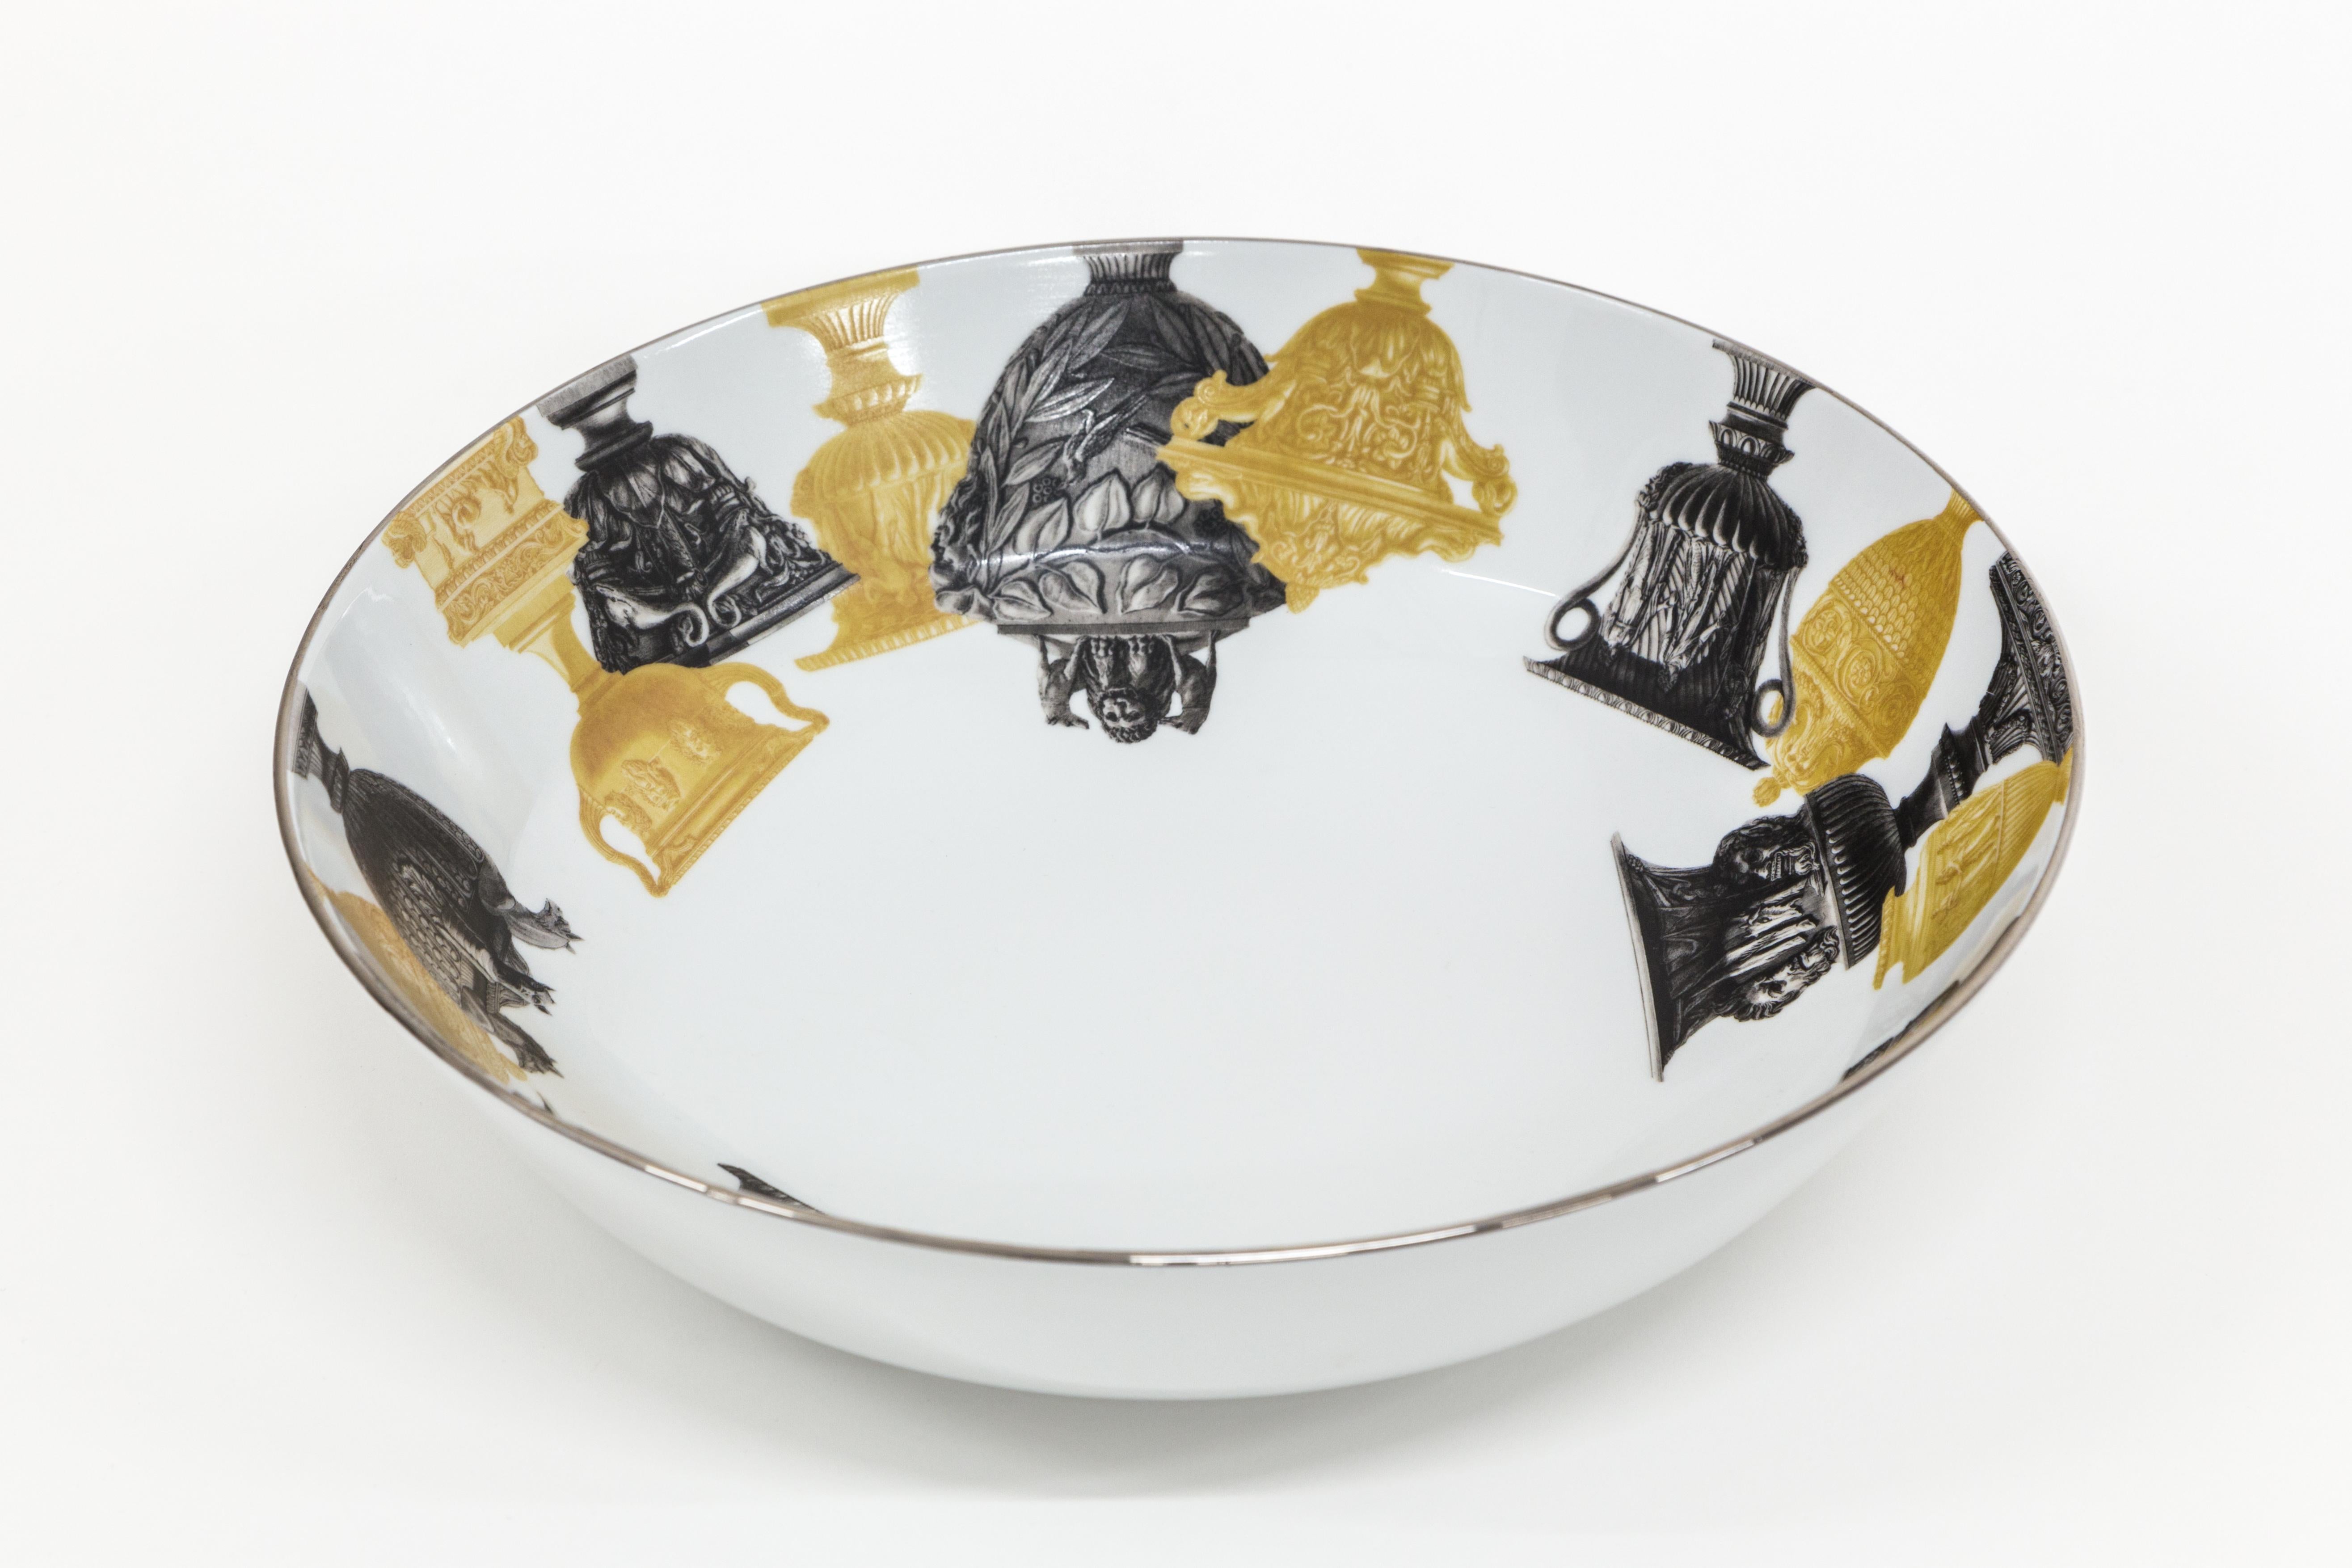 This 34cm diameter bowl is part of the Roma collection by Grand Tour By Vito Nesta. The very versatile shape is suitable as a fruit stand, table centerpiece or ornamental bowl on any shelf. An interplay of ancient vase and amphora designs surrounds